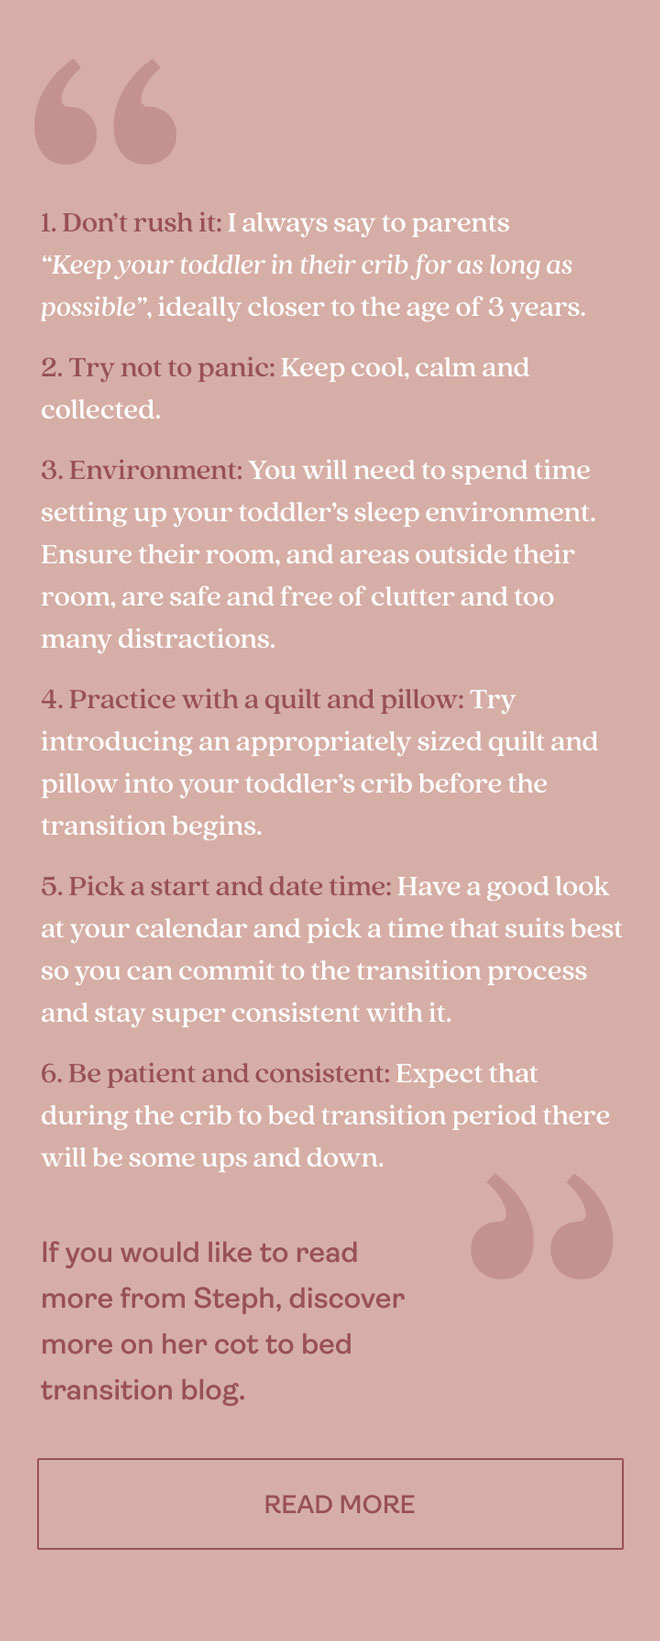 Top tips for transitioning from crib to bed